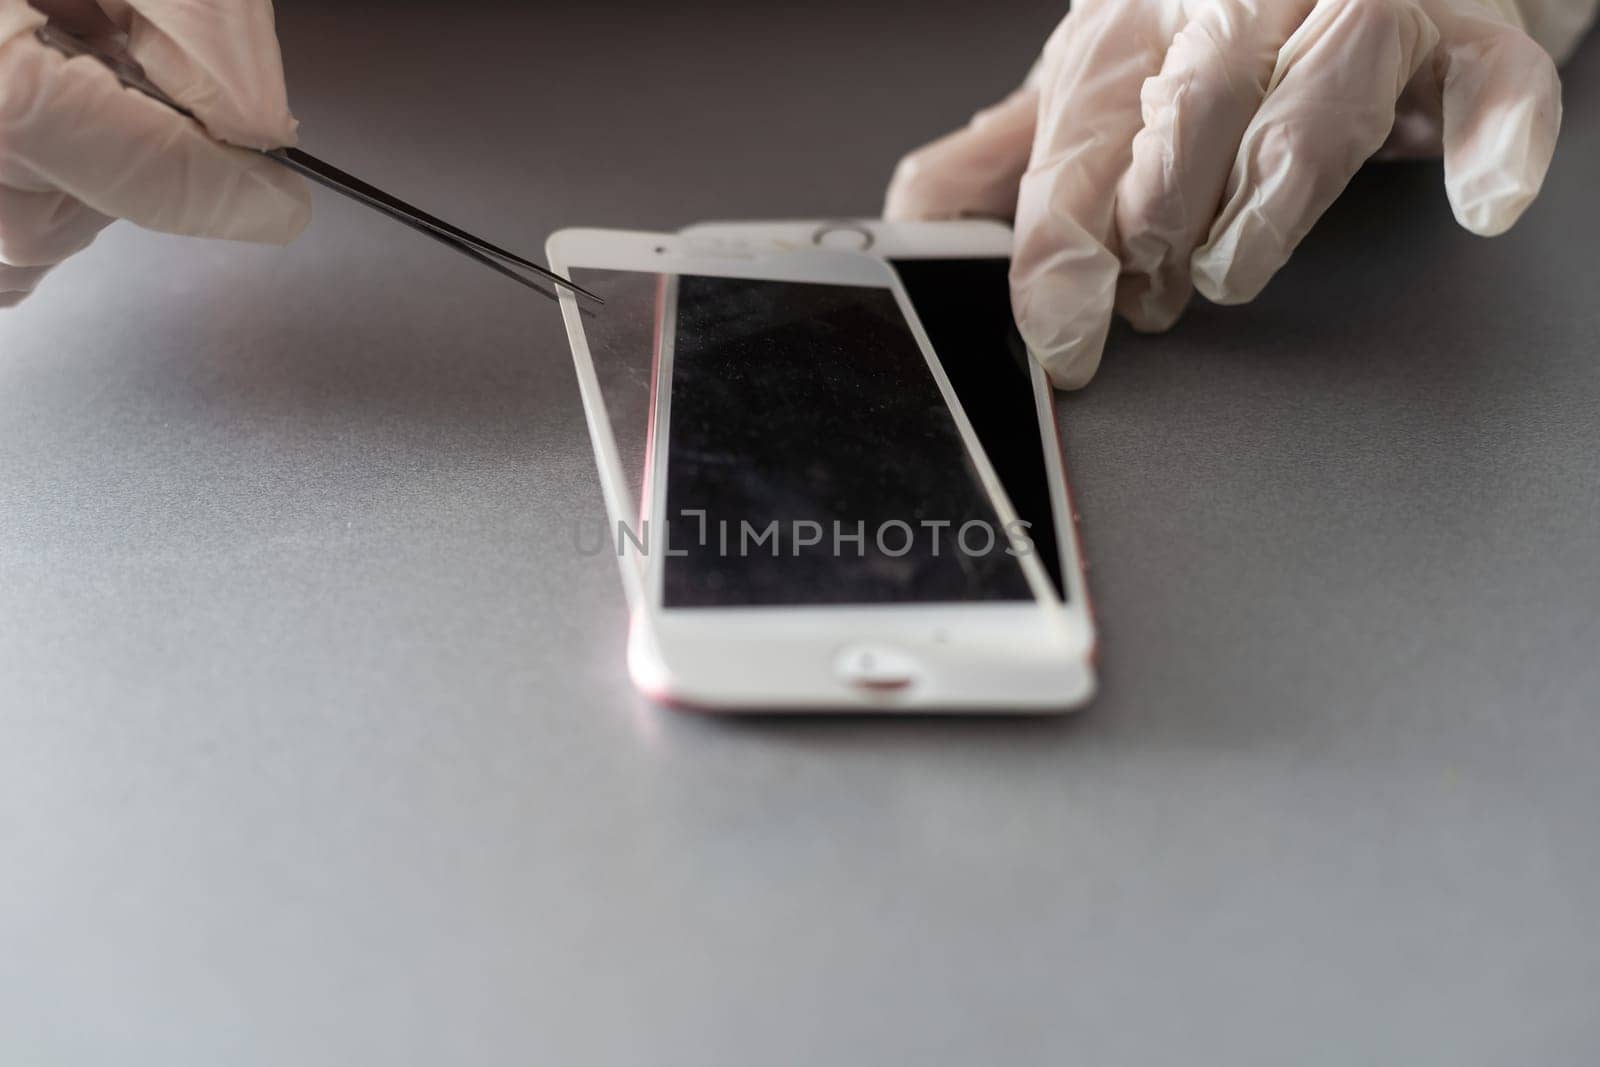 Technician or engineer preparing to repair and replace new screen broken and cracked screen smartphone preparing on desk with copy space.